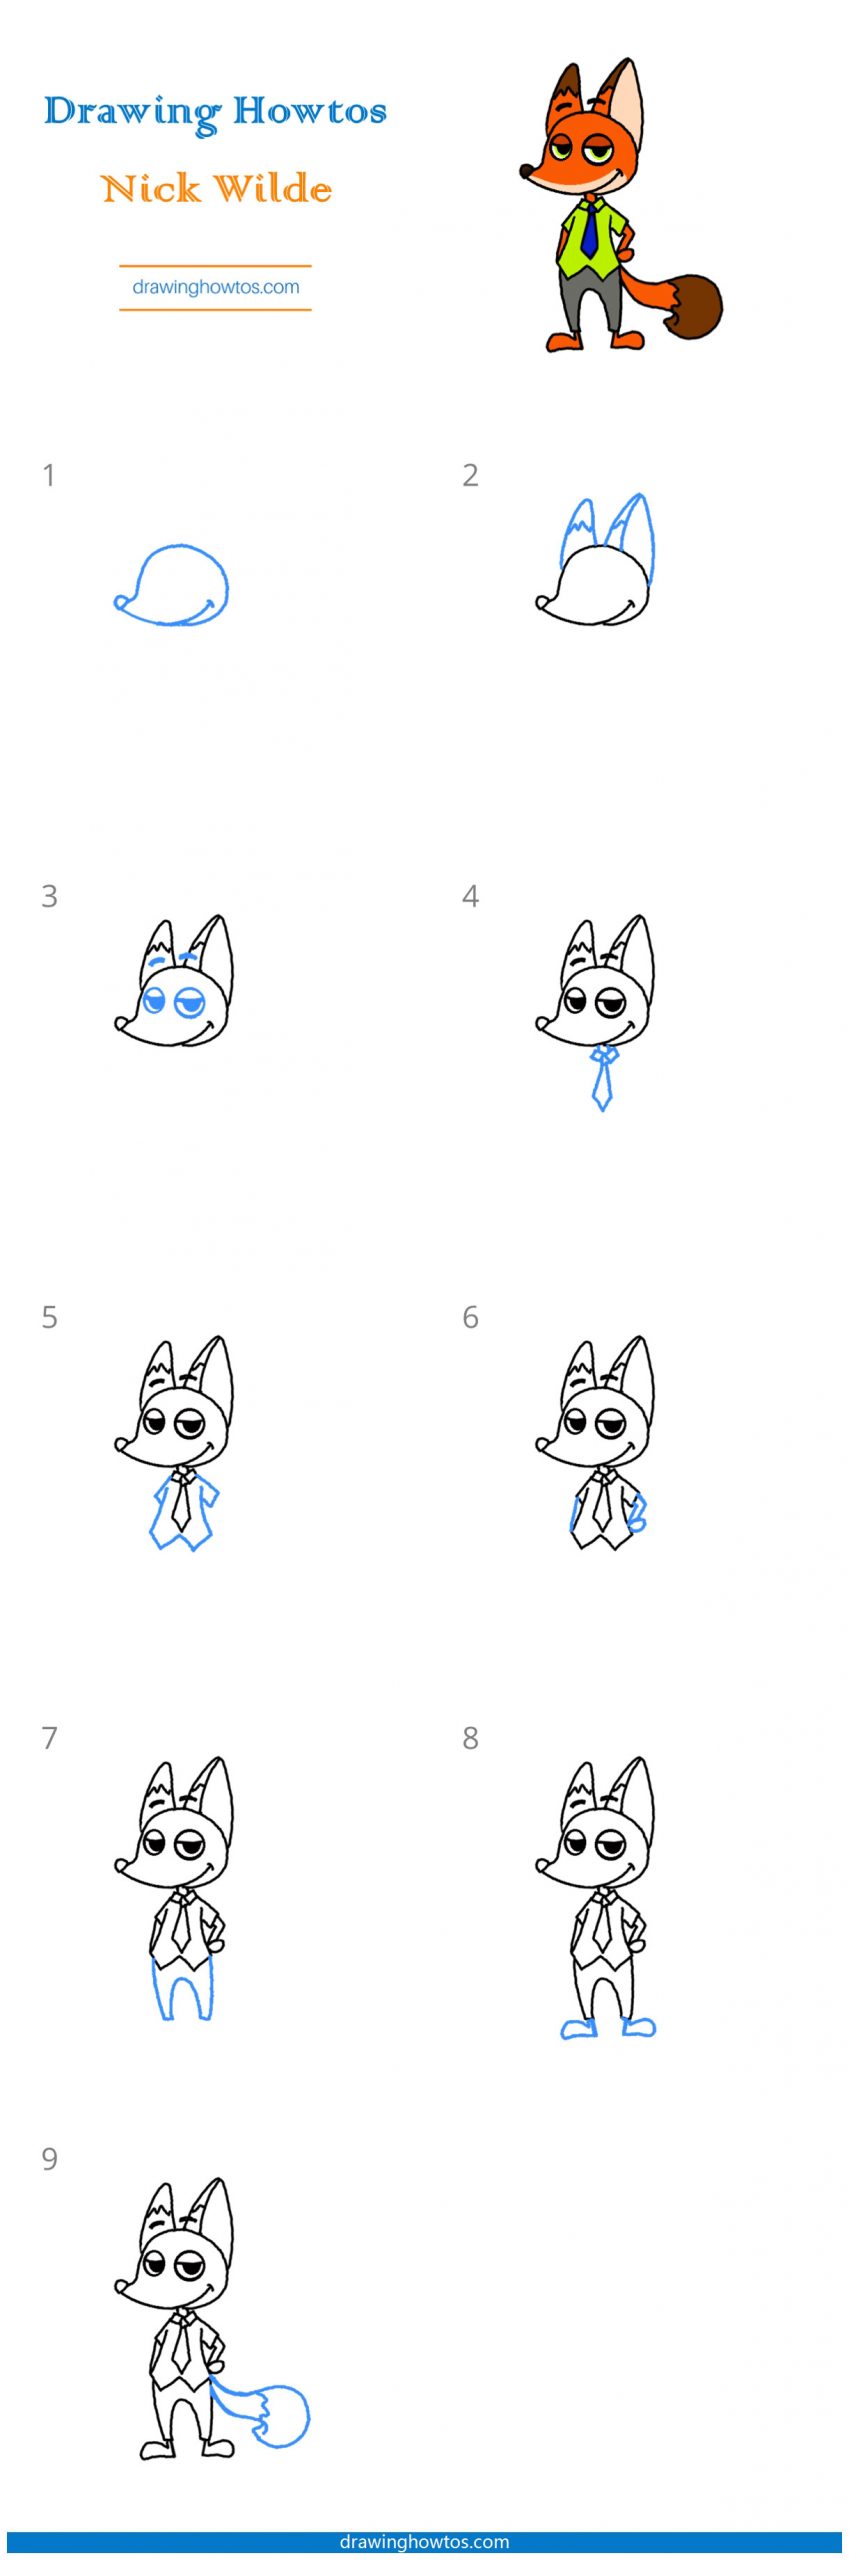 How to Draw Nick Wilde from Zootopia Step by Step